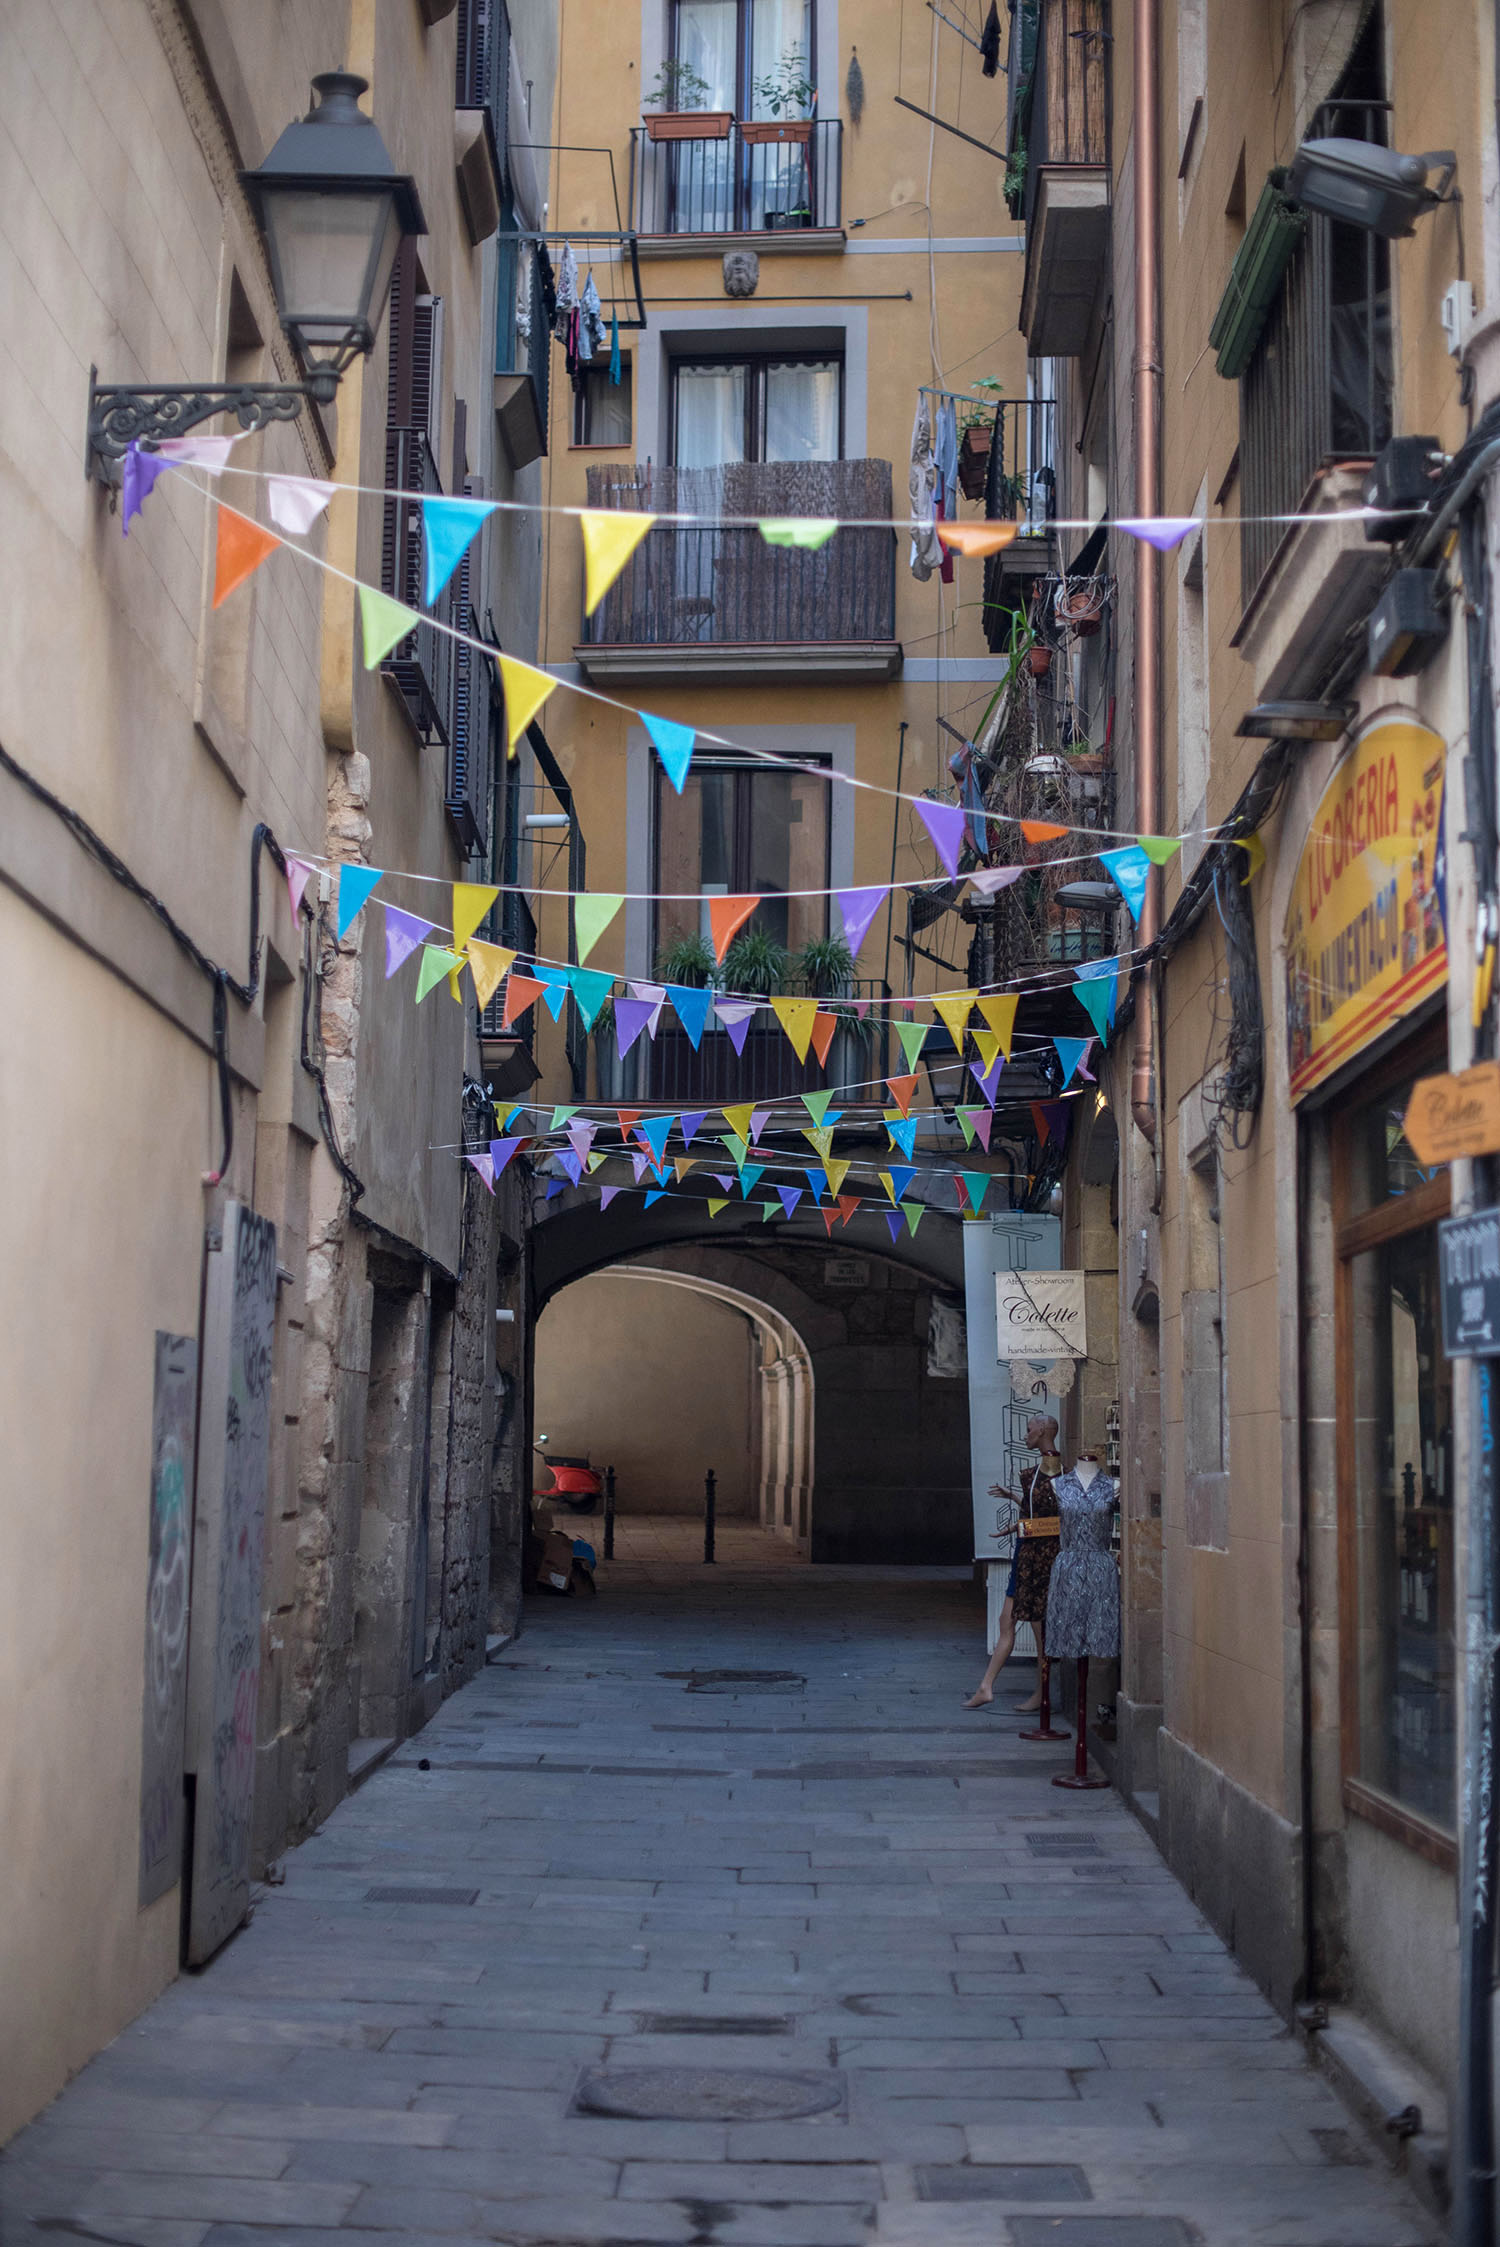 A narrow laneway in the Barri Gotic in Barcelona, as captured by Canadian travel blogger Cee Fardoe of Coco & Vera